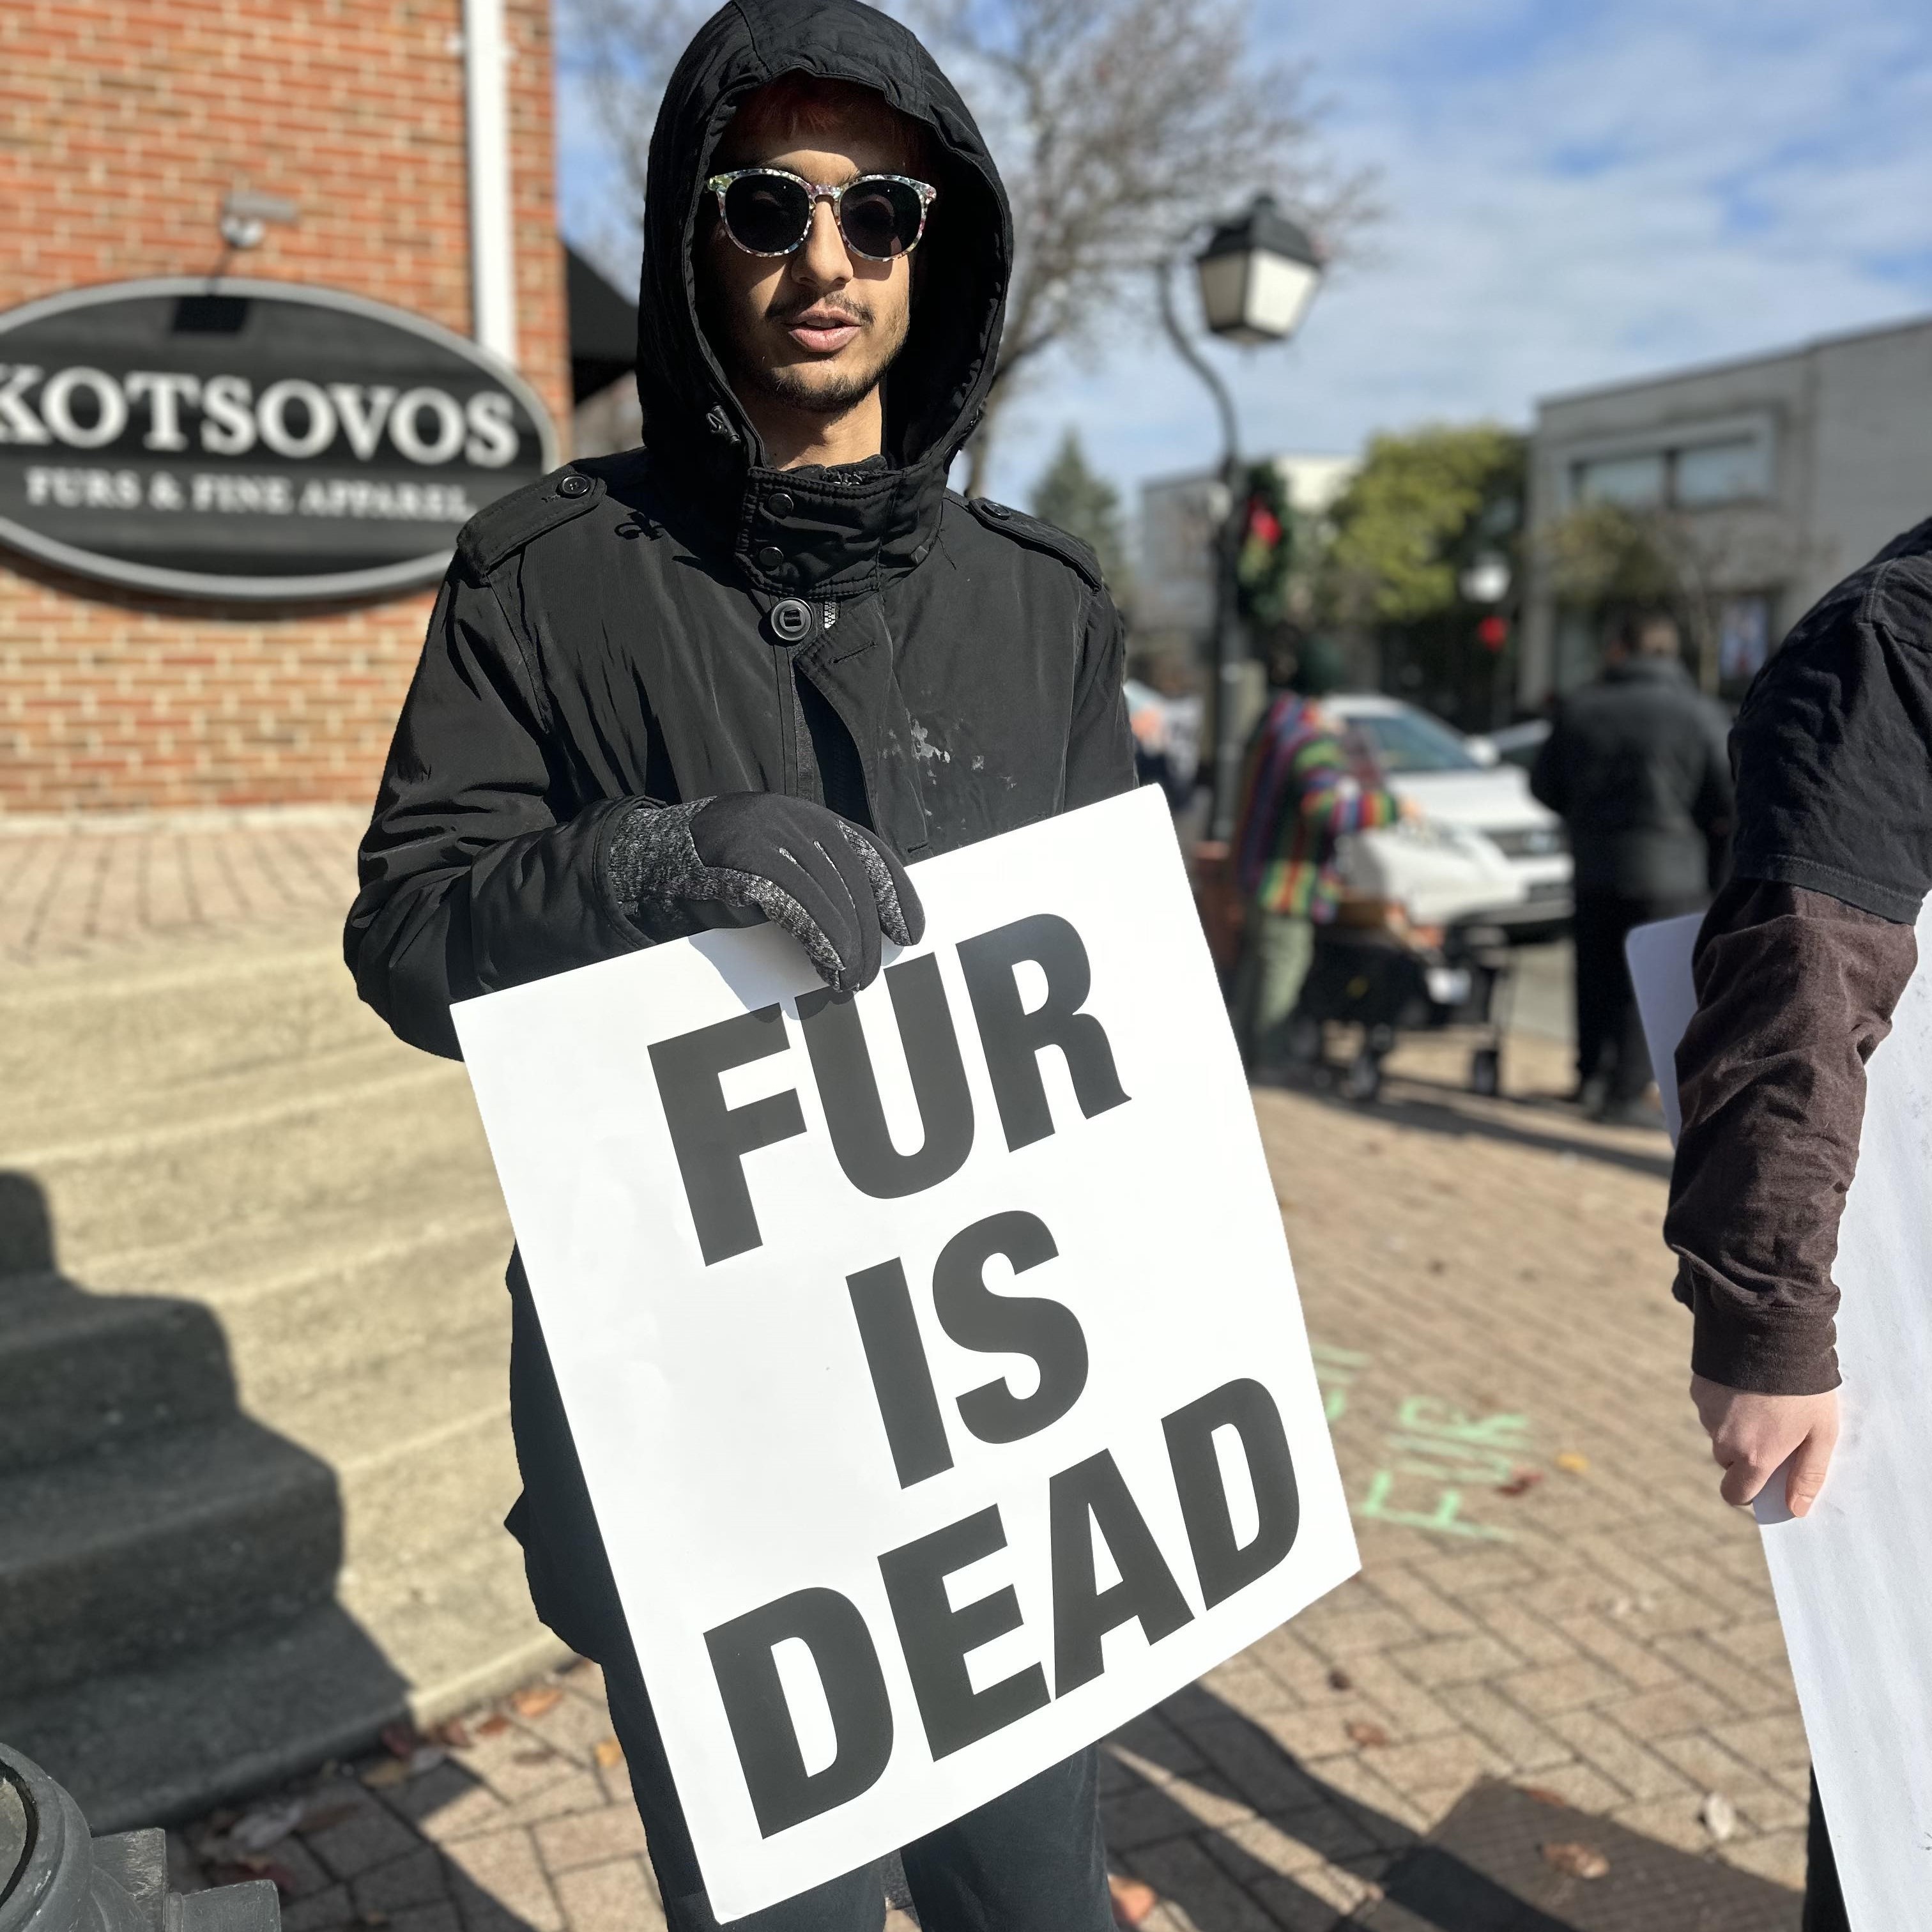 Aashish with a sign that says 'Fur is dead'